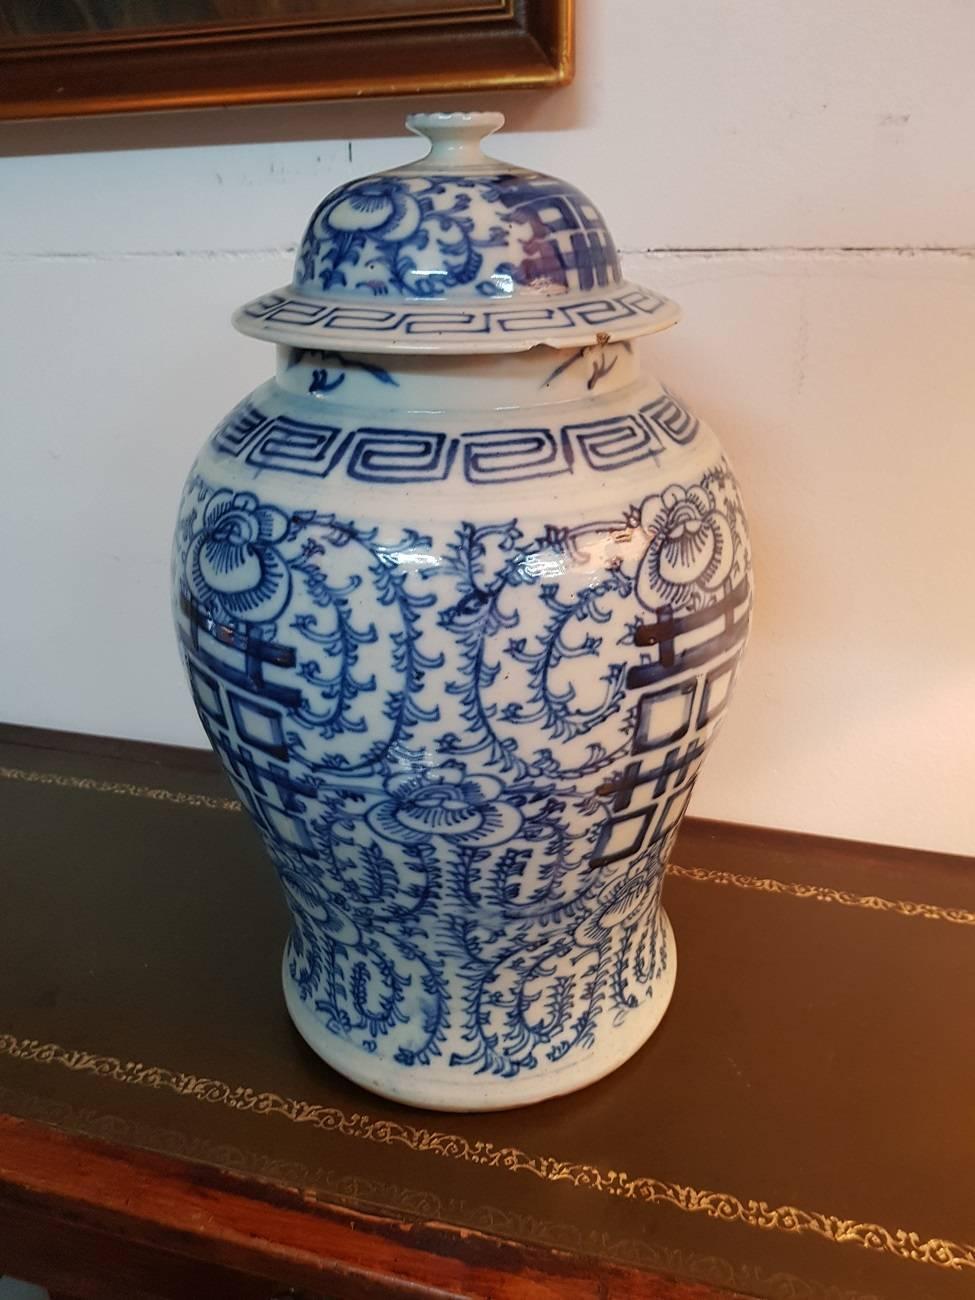 Chinese porcelain jar or vase from the second half of the 19th century with blue hand-painted decor and double joy signs. The lid has some chips but otherwise in a good condition.

The measurements are
Depth 26 cm / 10.2 inch.
Width 26 cm / 10.2